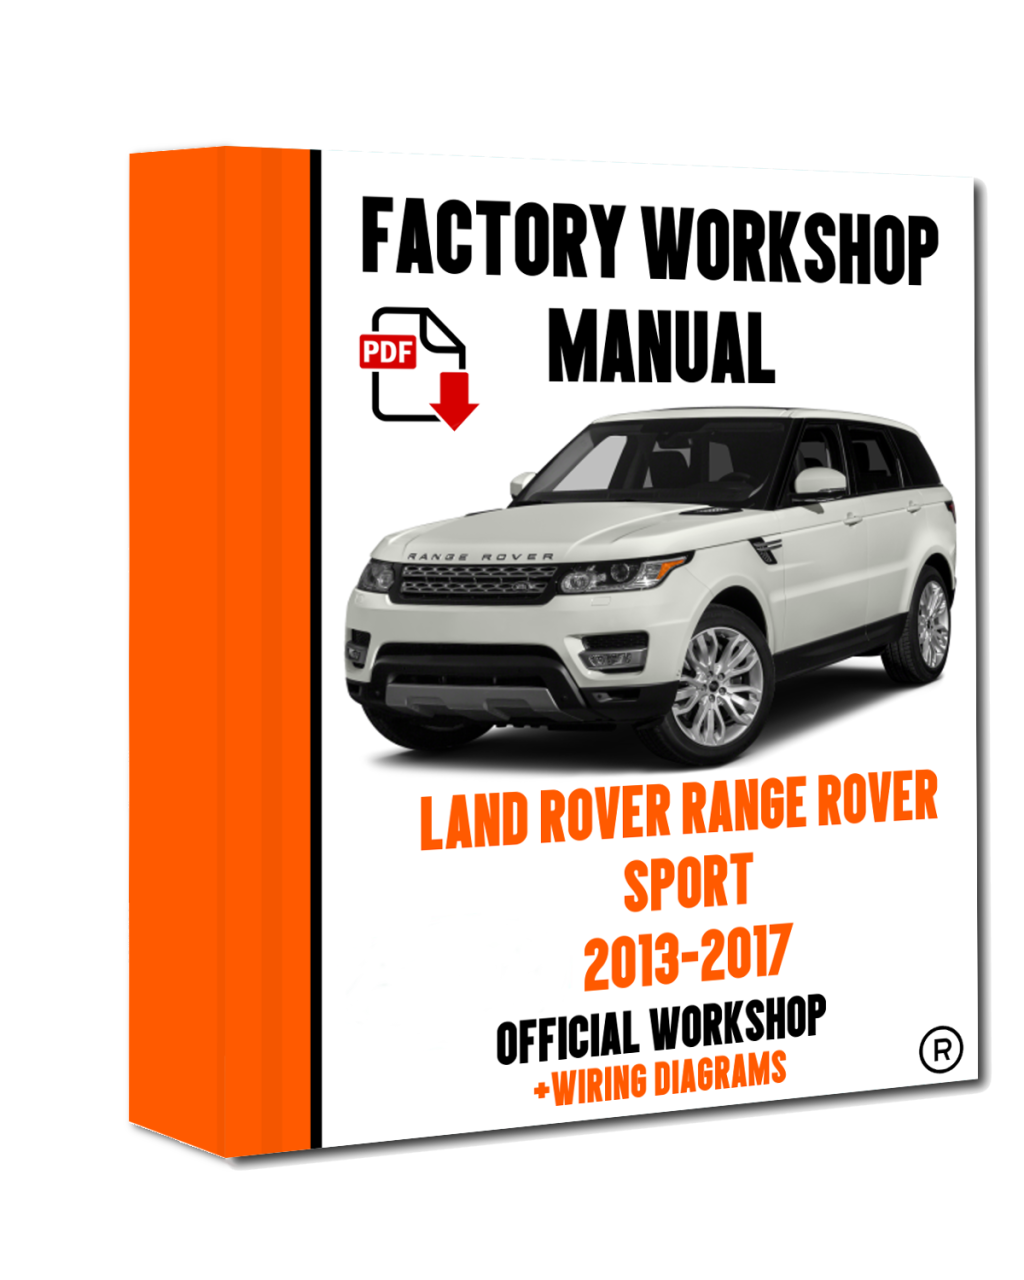 OFFICIAL WORKSHOP Manual Service Repair Land Rover Range Rover Sport  -x